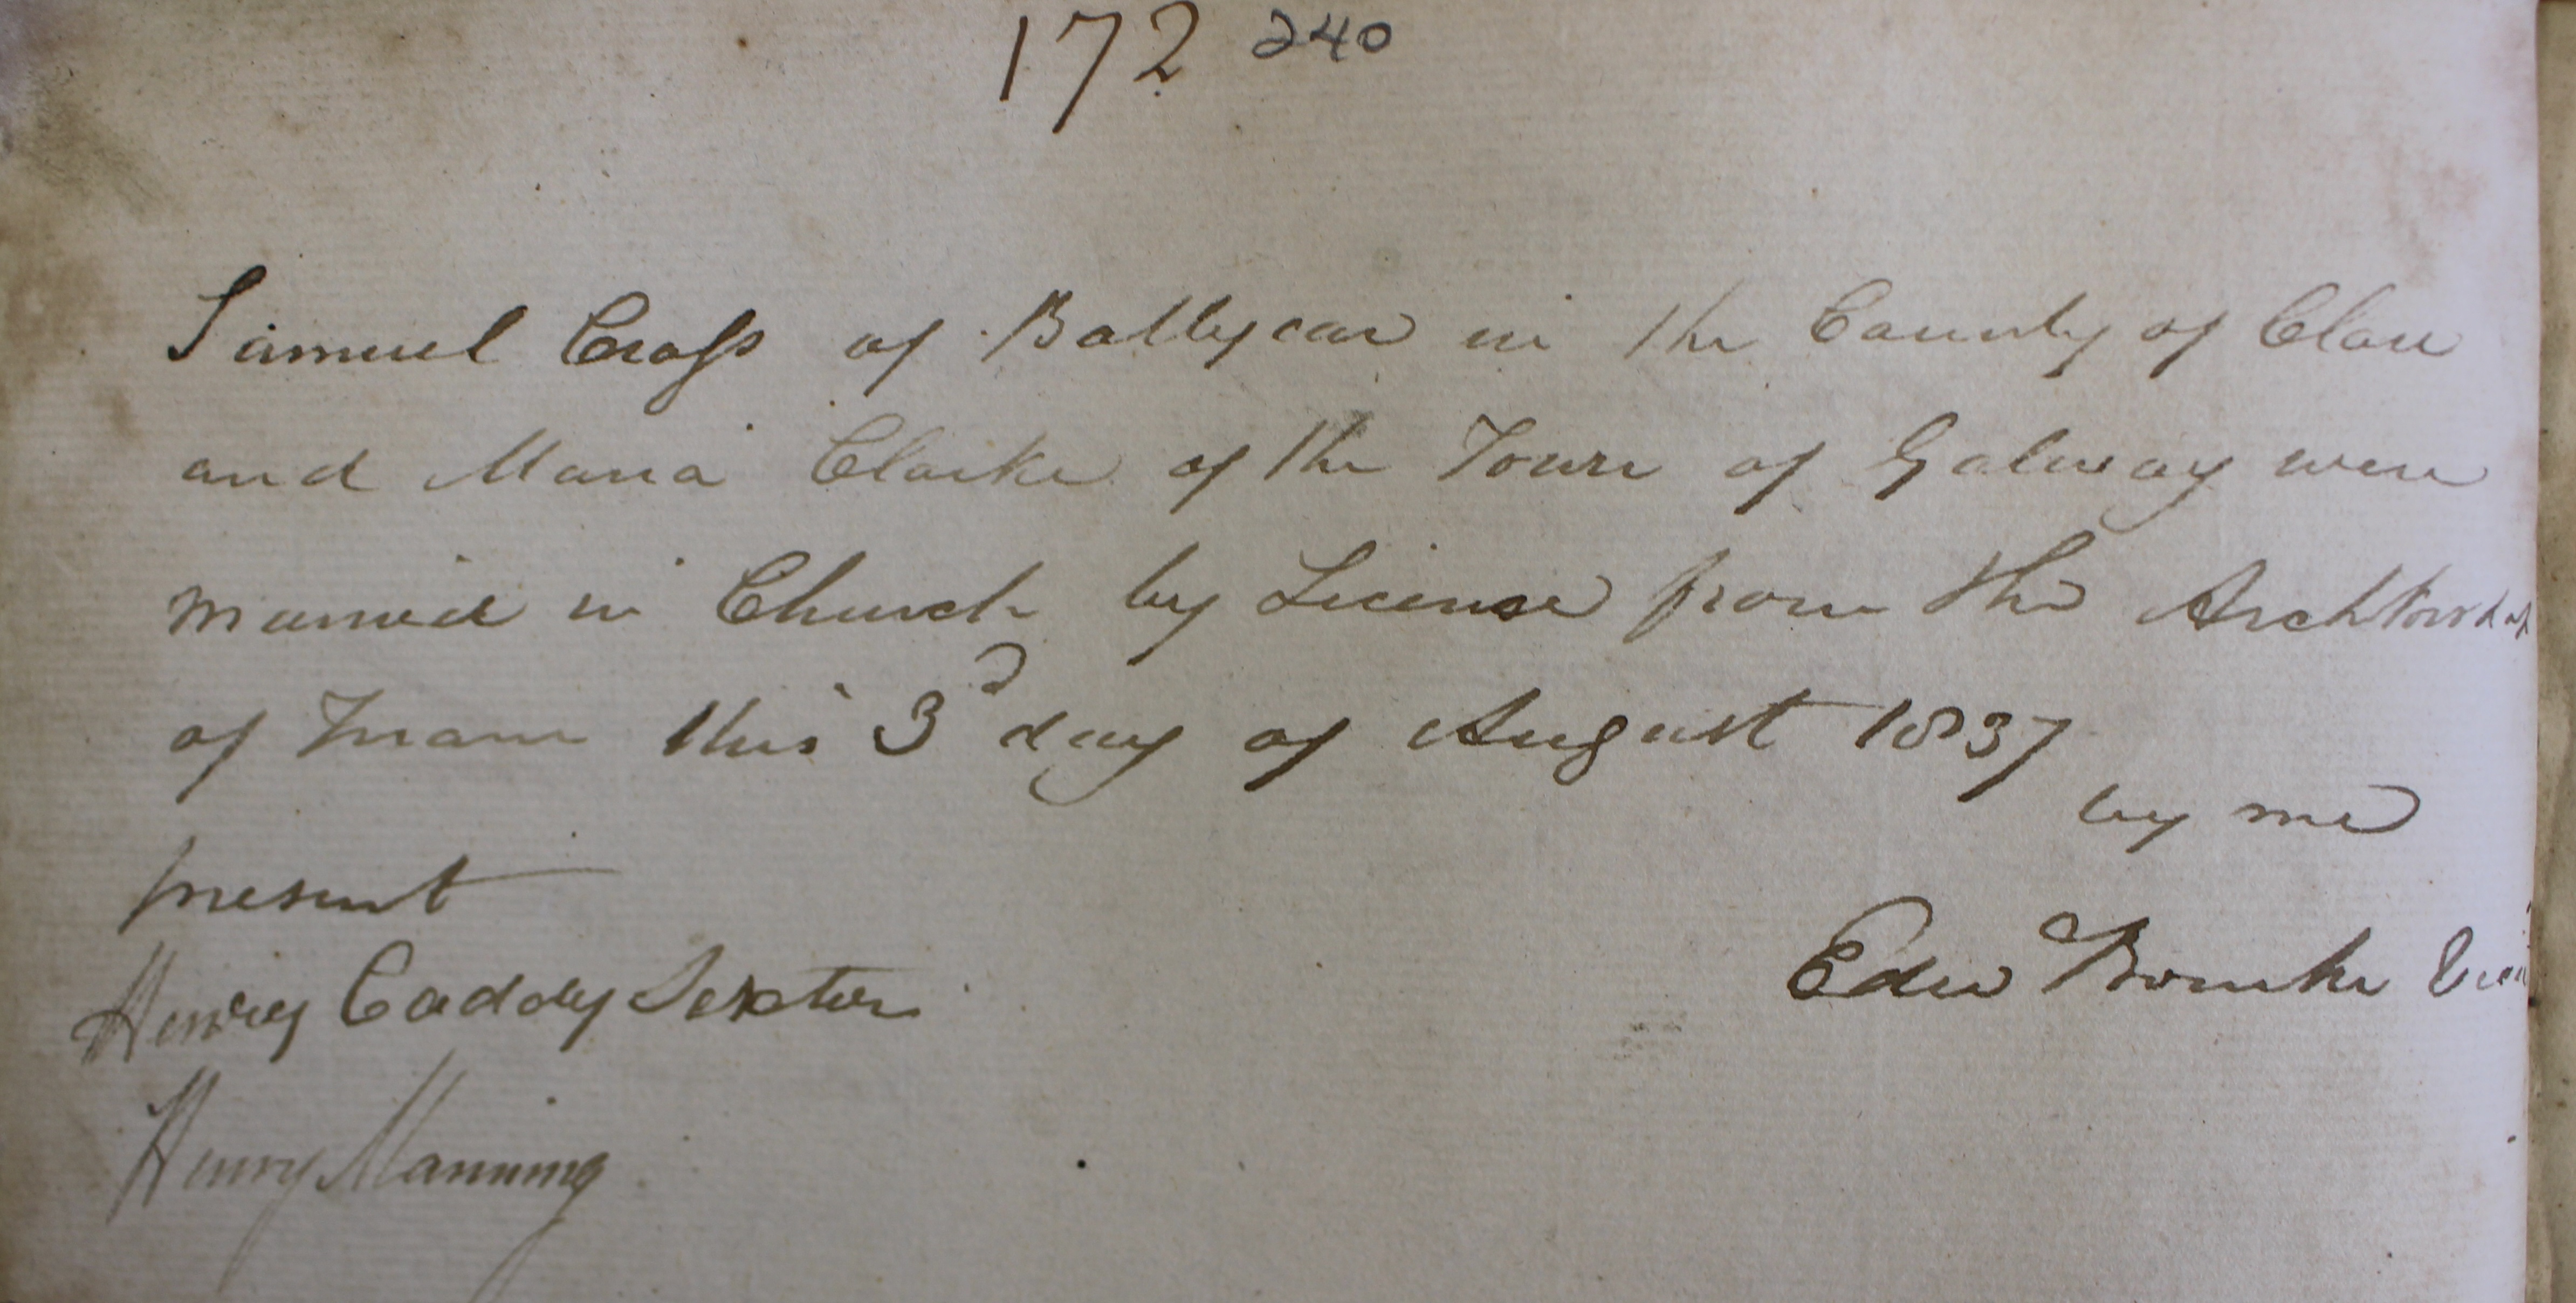 This marriage entry in the combined register, recording the marriage of Samuel Cross and Maria Clarke, on 3 August 1837 by Revd Bourke. The event was witness by Henry Caddy in his role as Sexton. RCB Library P519.01.1, reproduced with the permission of the Director of the National Archives.